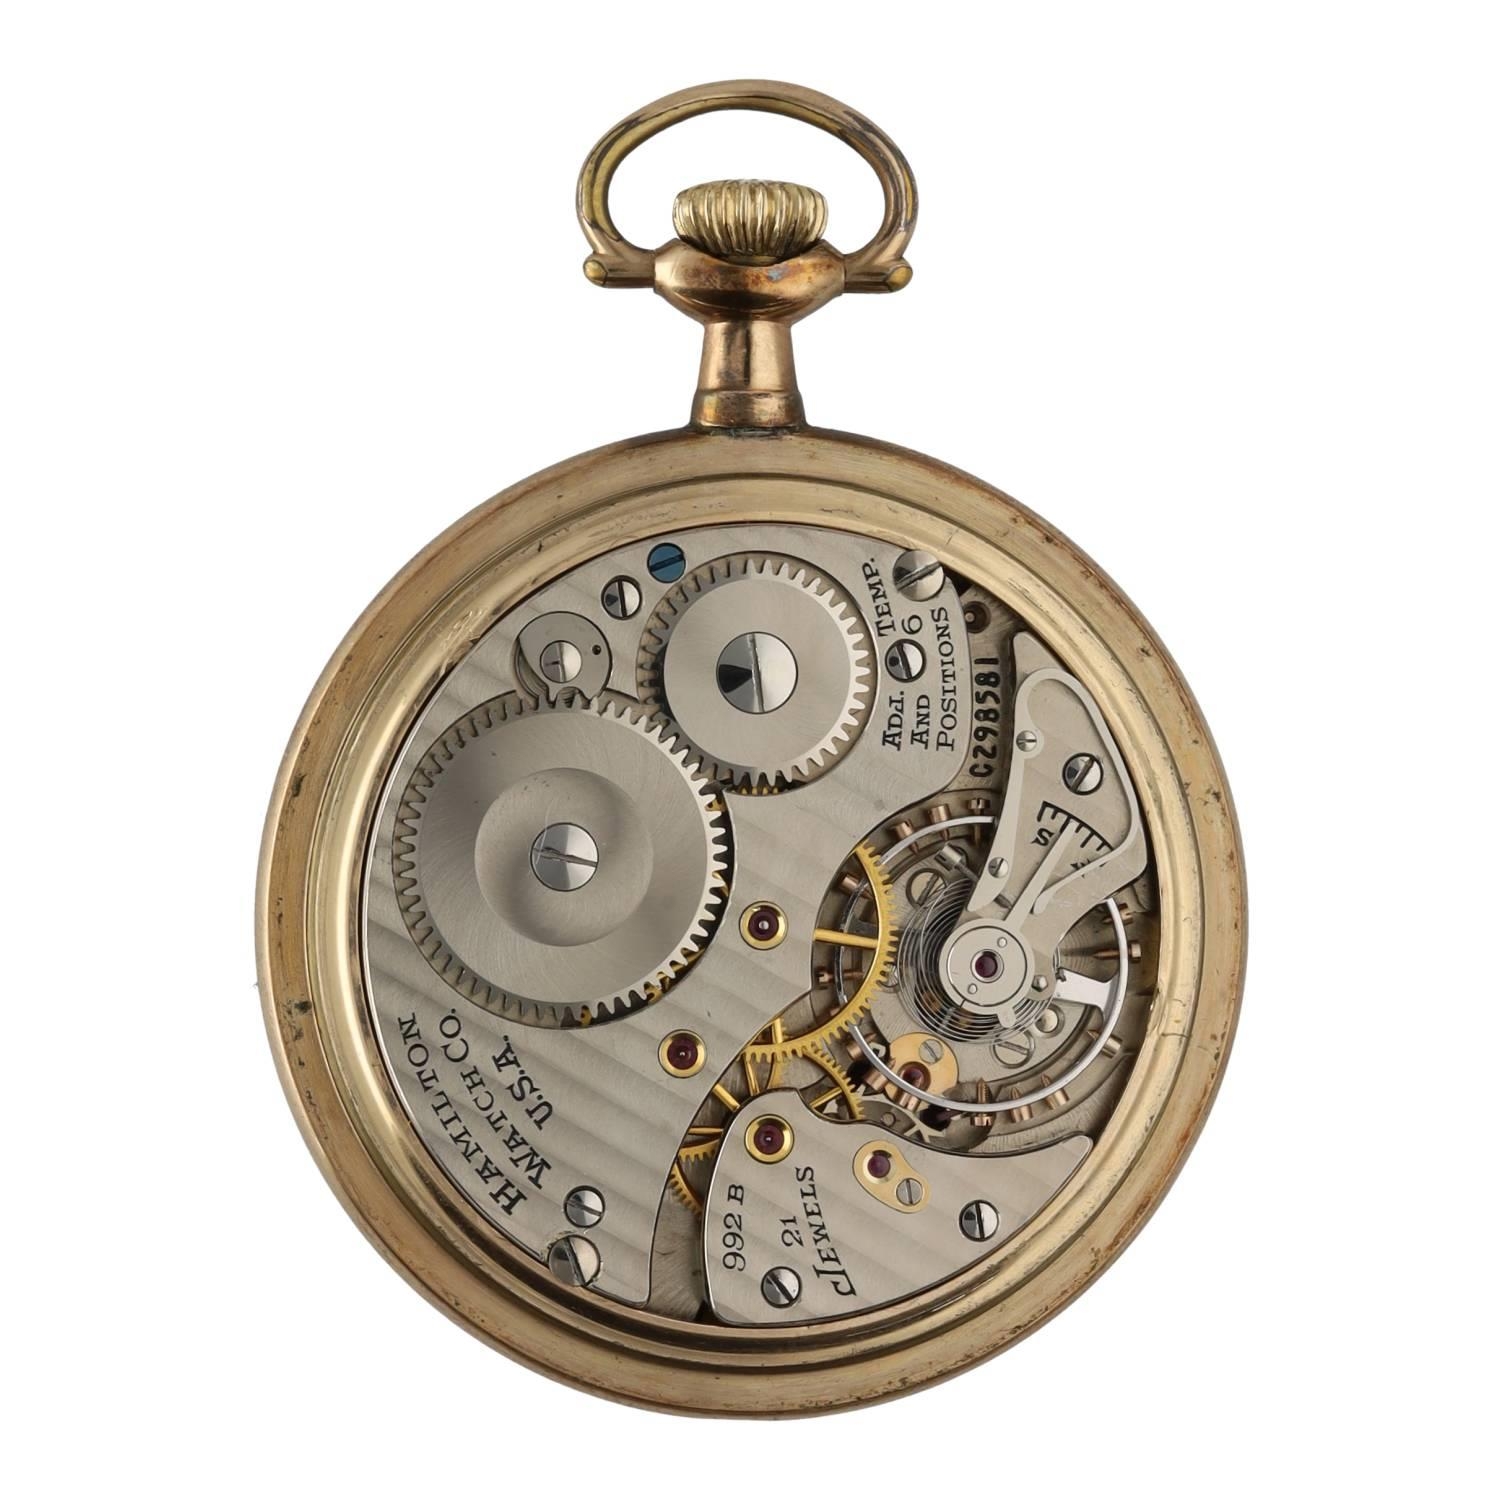 Hamilton 'Railway Special' gold plated lever set pocket watch, circa 1948, serial no. C298581, - Image 3 of 4